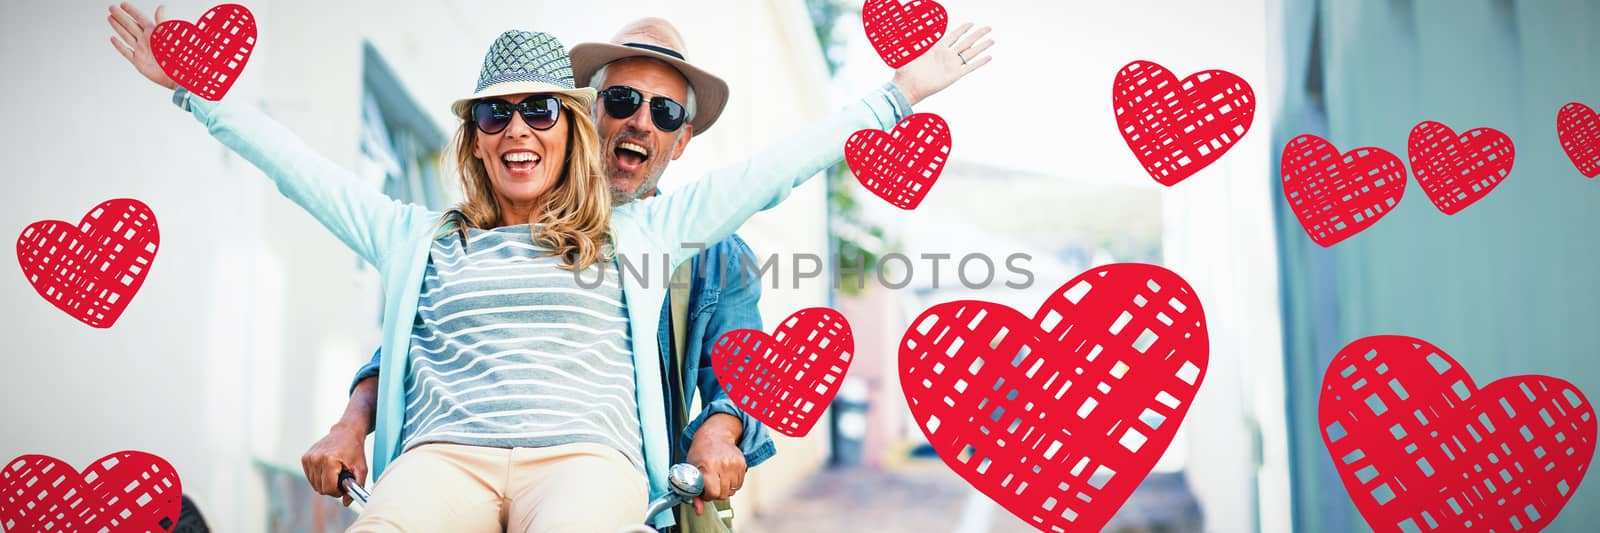 Composite image of red hearts by Wavebreakmedia